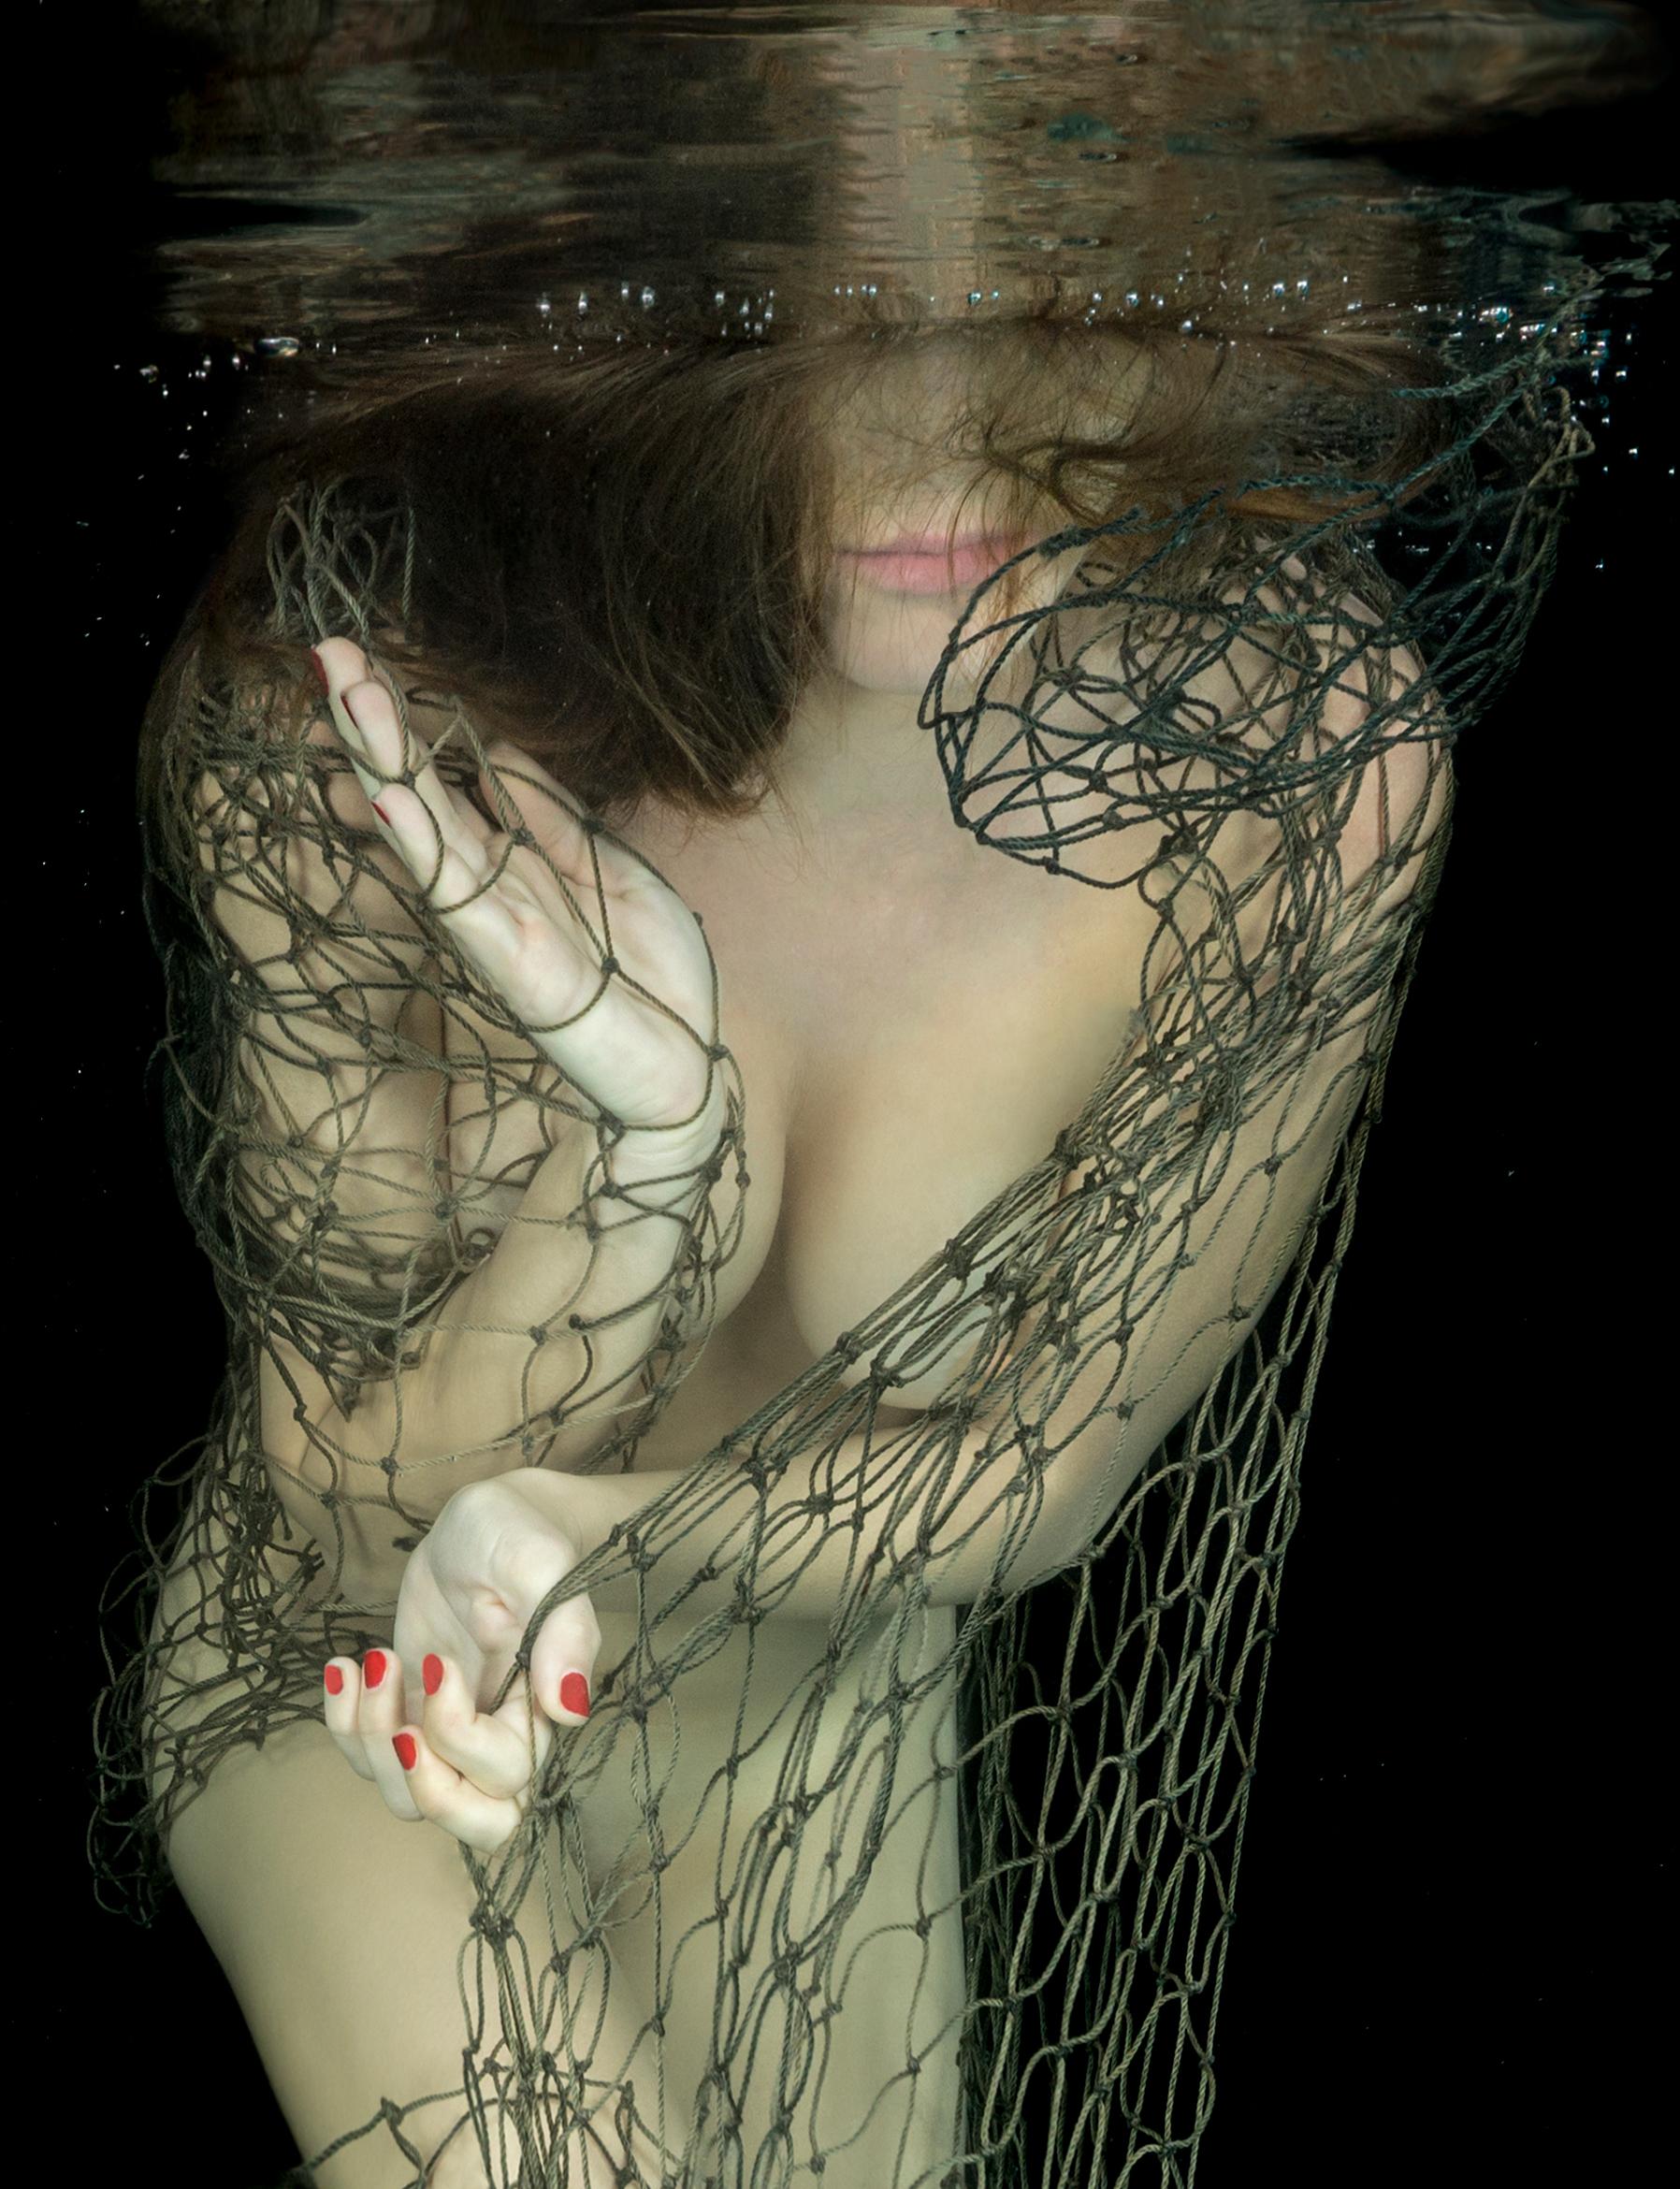 Alex Sher Nude Photograph - Lucky Catch - underwater nude photograph - archival pigment print 24x18"